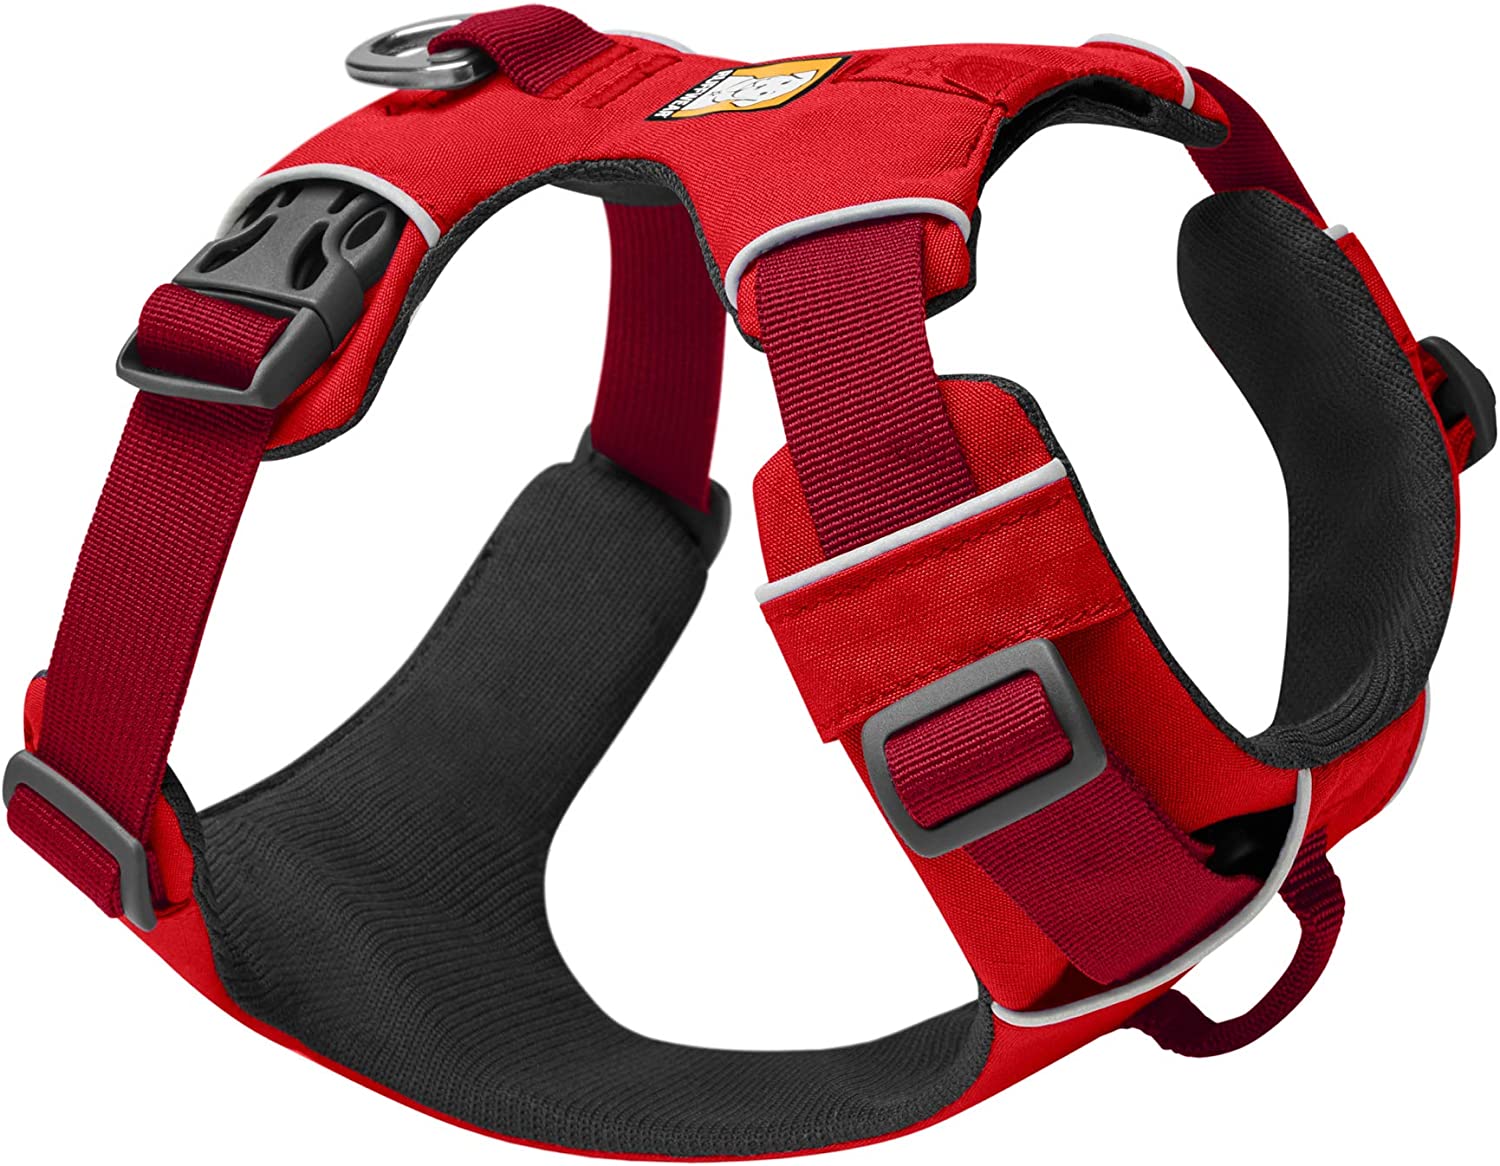 Our Favorite Products for Dog Owners: Ruffwear Dog Harness